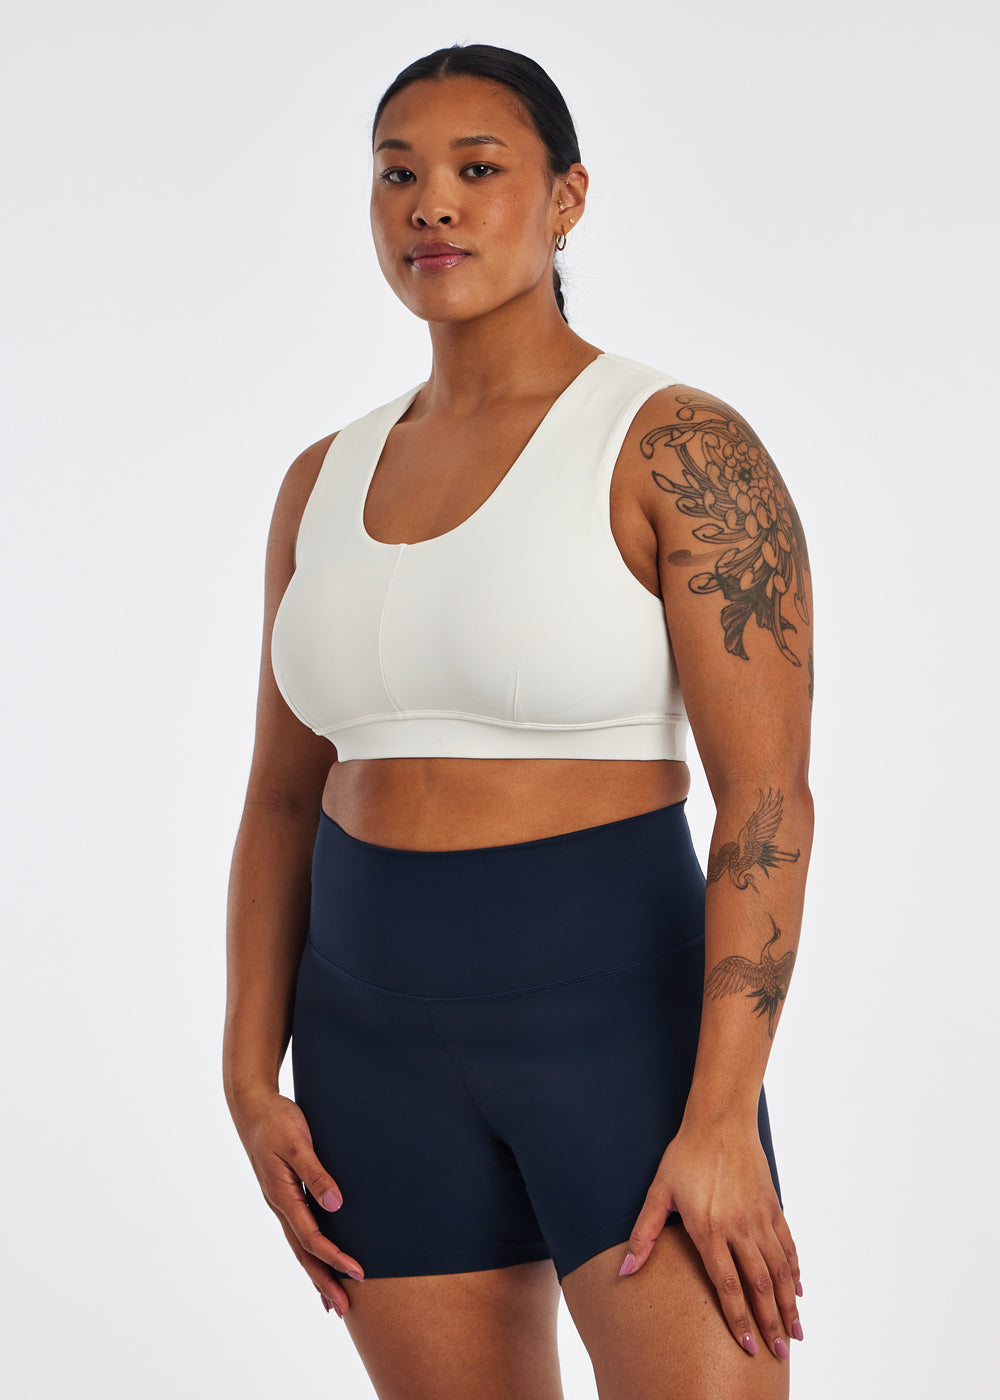 She has something to SMILE 😊 about! The Oiselle Pockito Bra is beautiful,  fits like a dream AND has pockets! Easily carry your phone o